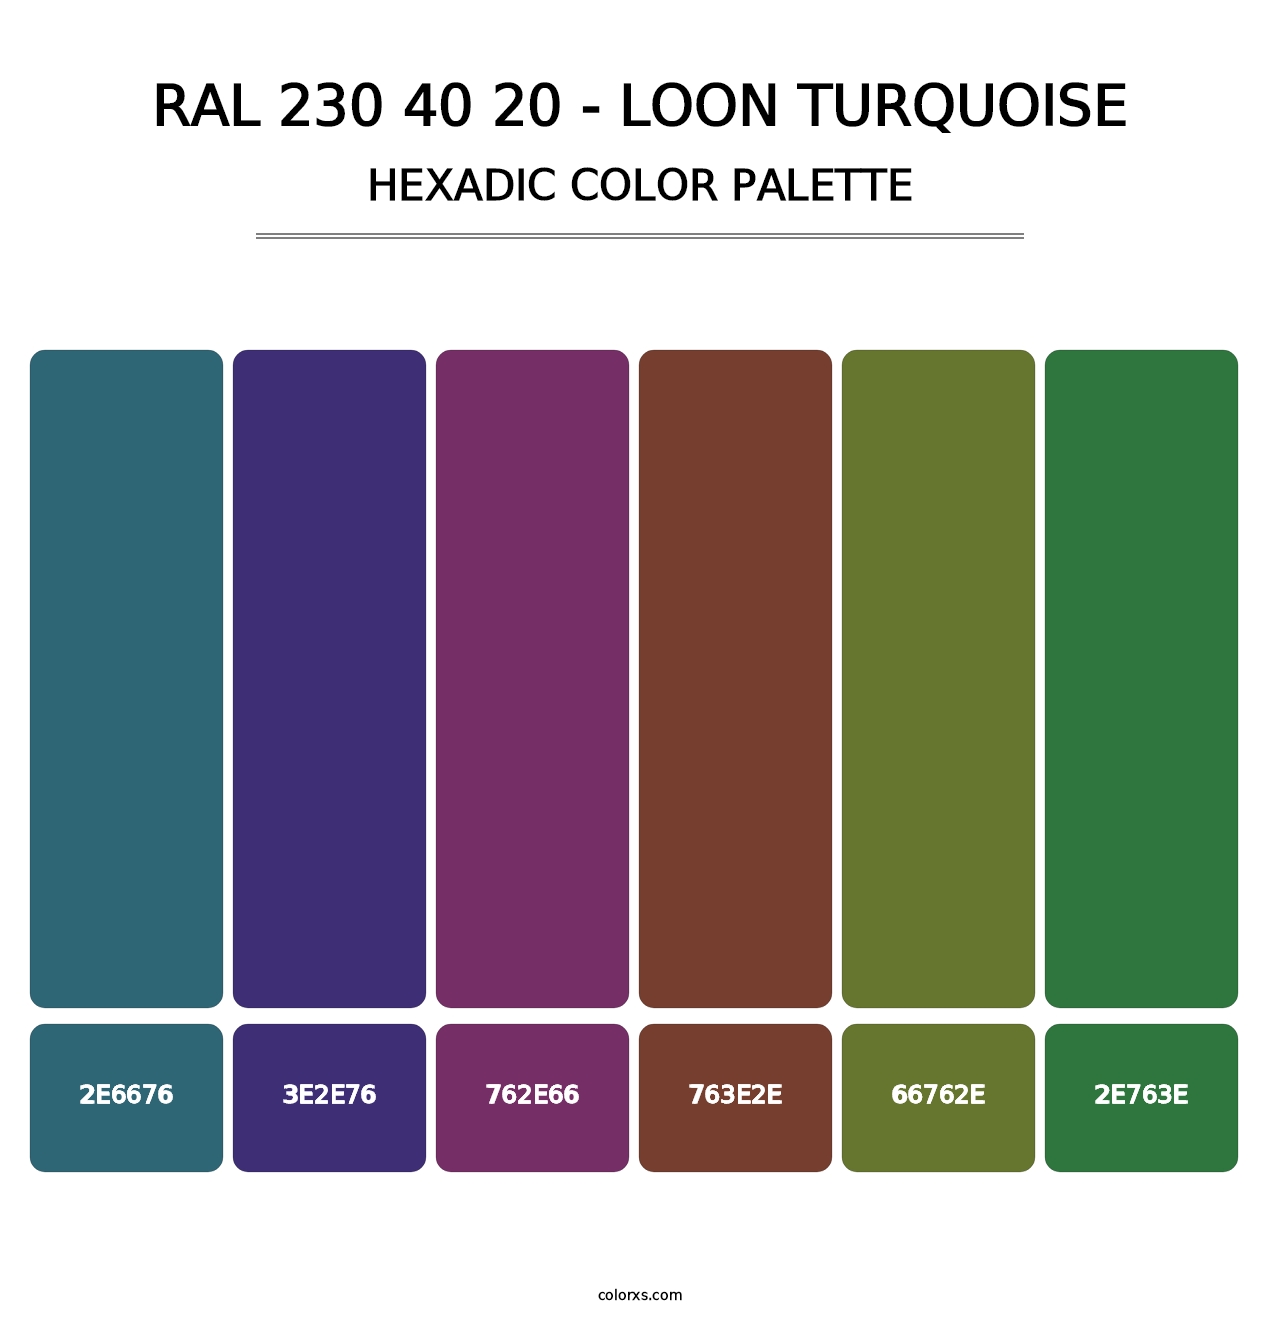 RAL 230 40 20 - Loon Turquoise - Hexadic Color Palette